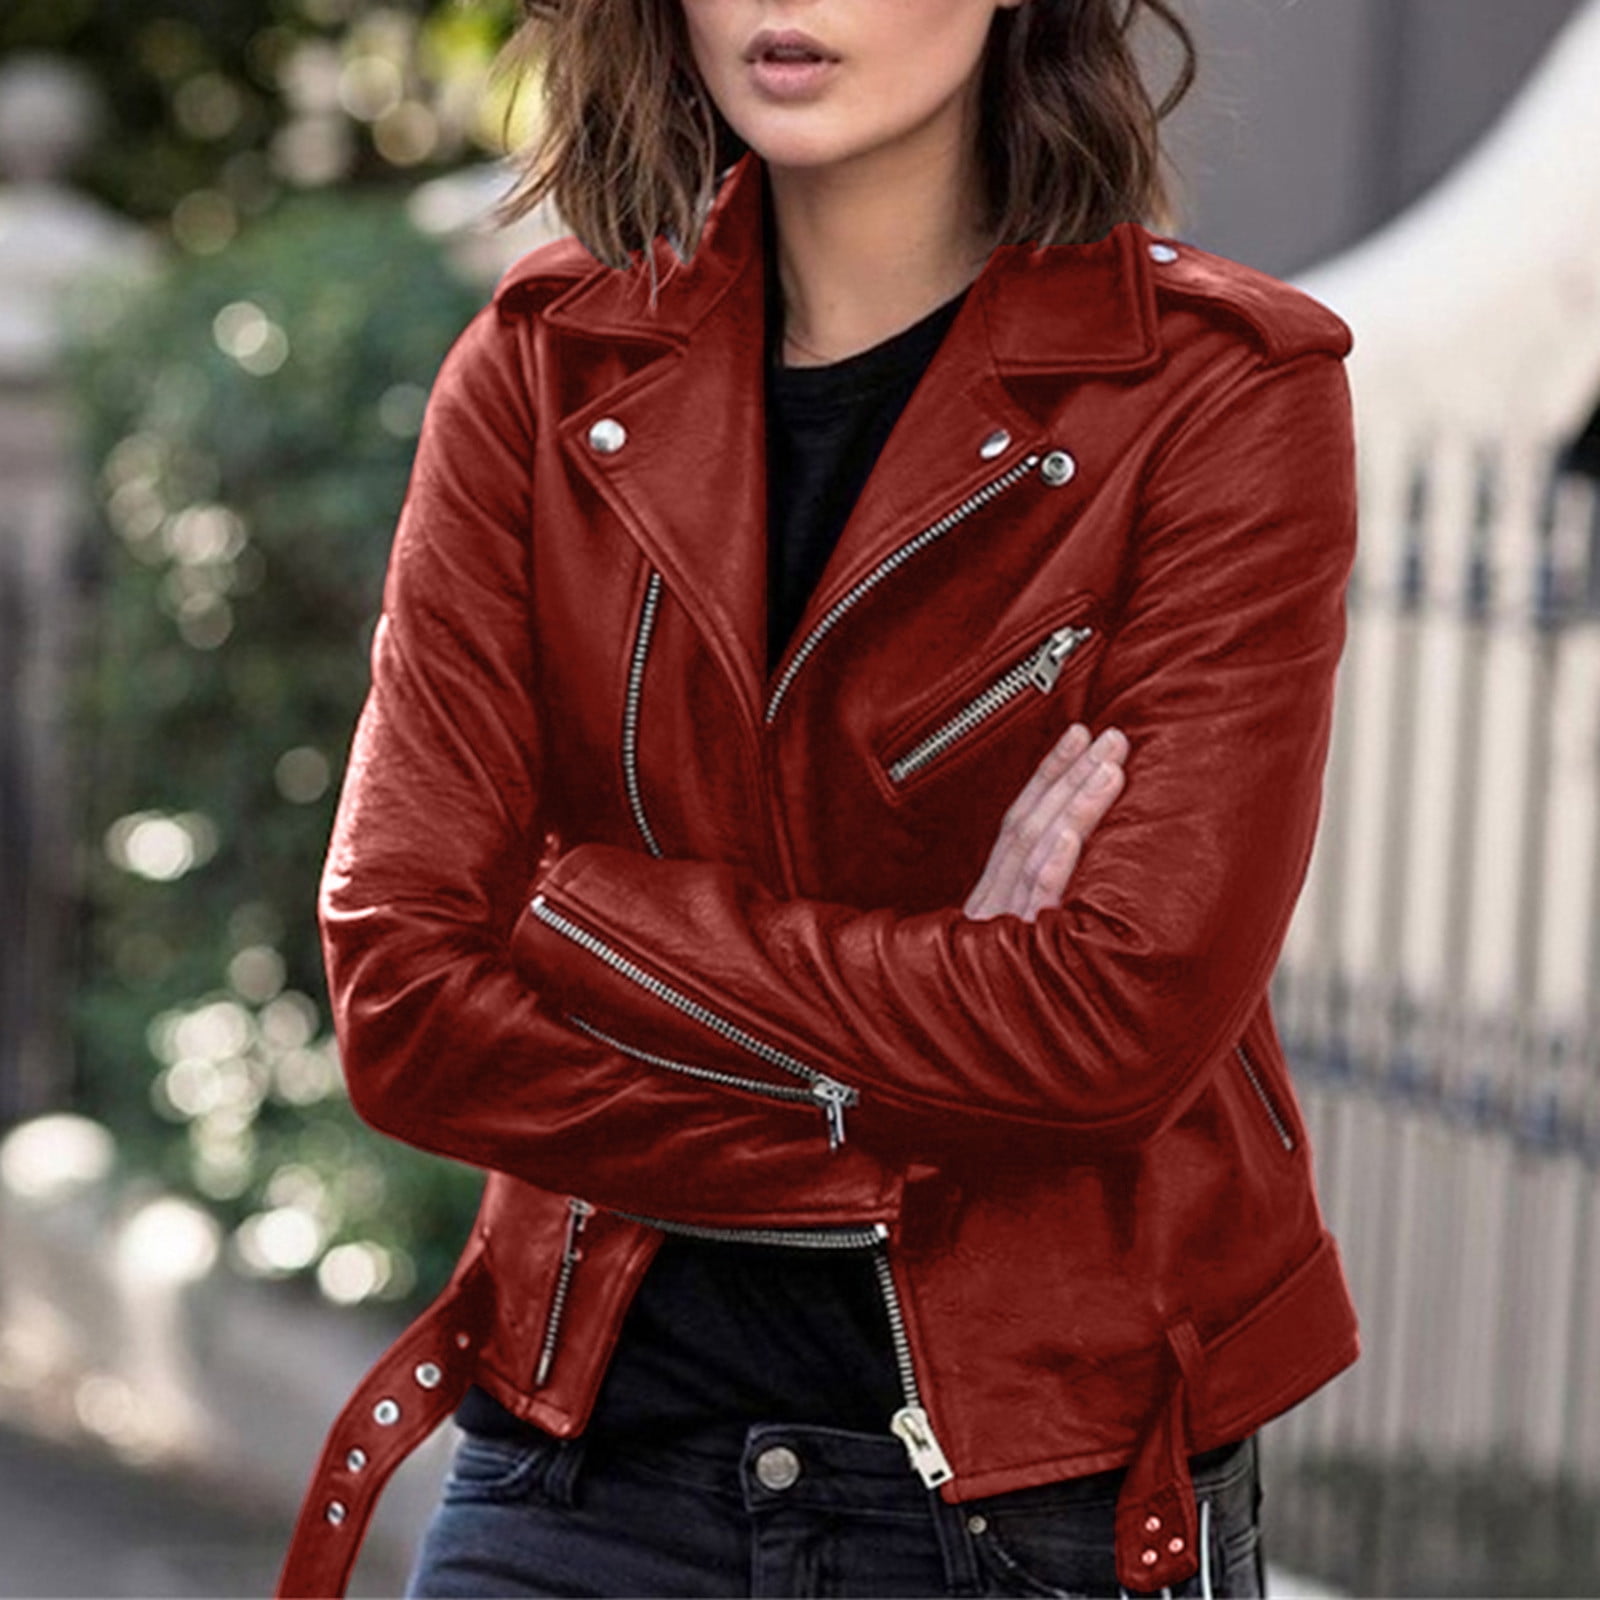 Leather Jackets for Women, Leather Dresses, Furs & More